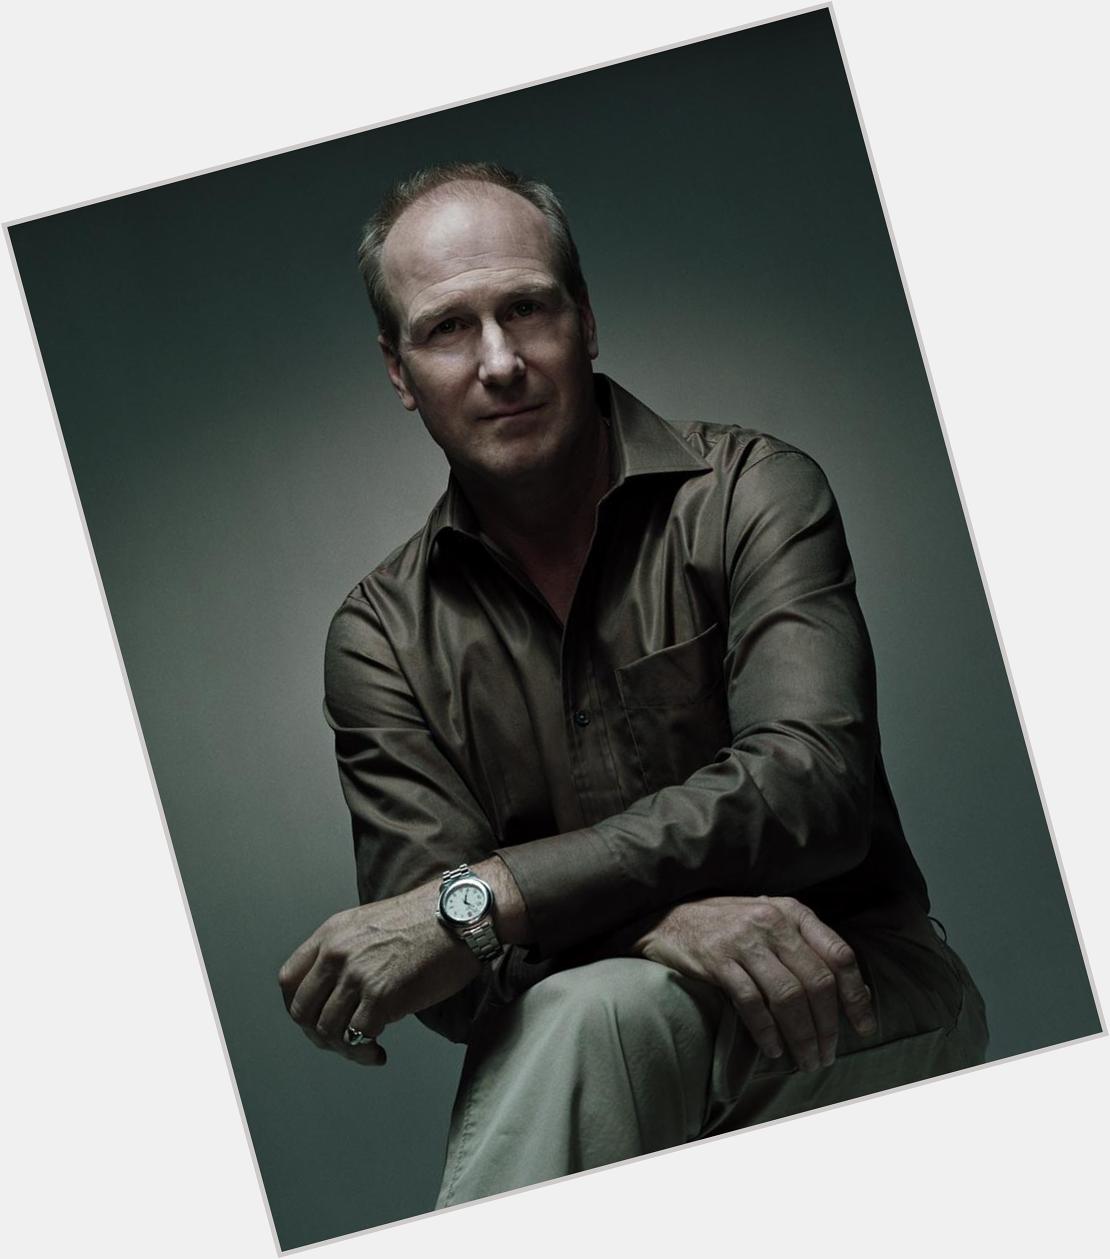 Wishing a happy 65th birthday to the great William Hurt! 